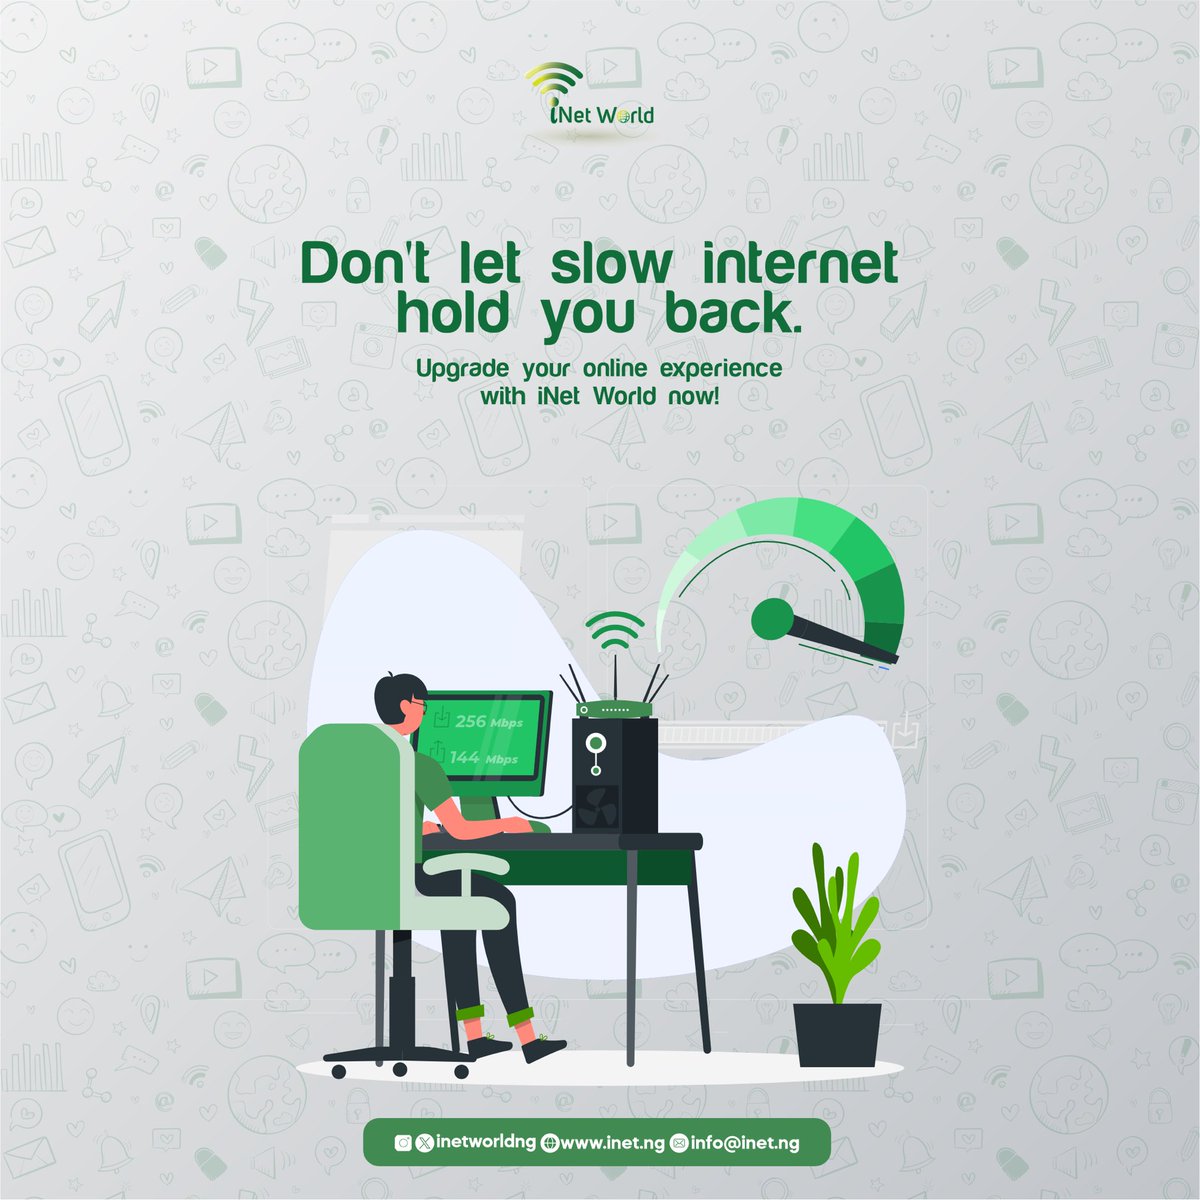 Tired of slow internet holding you back? 🐌

Stop waiting for it to get better! ⏳

Upgrade to iNet World today and say goodbye to slow internet. 🚀

Onana #Anikulapo Timini Cross #lifeissweetwithvuvaa Mimiko